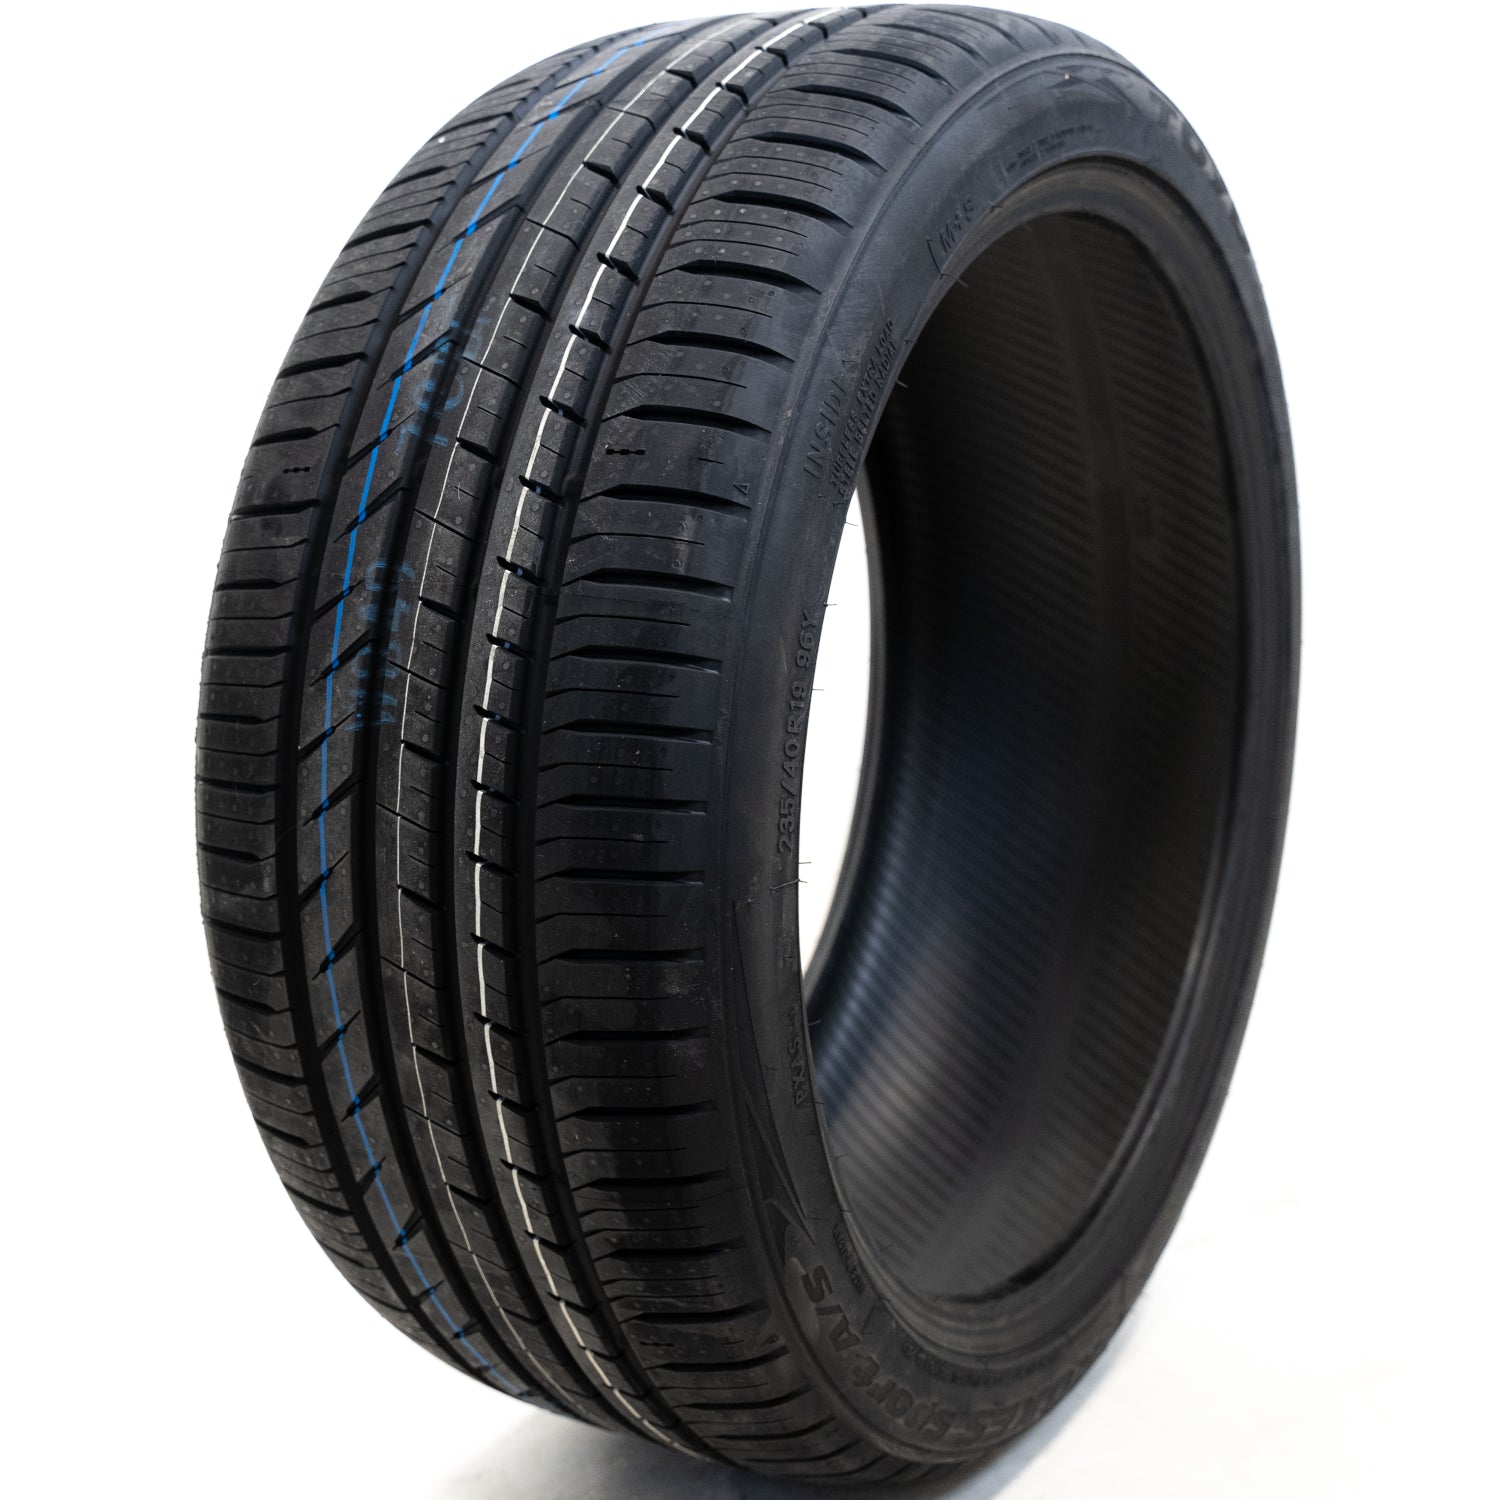 TOYO TIRES PROXES SPORT A/S 225/45R17XL (25X8.9R 17) Tires